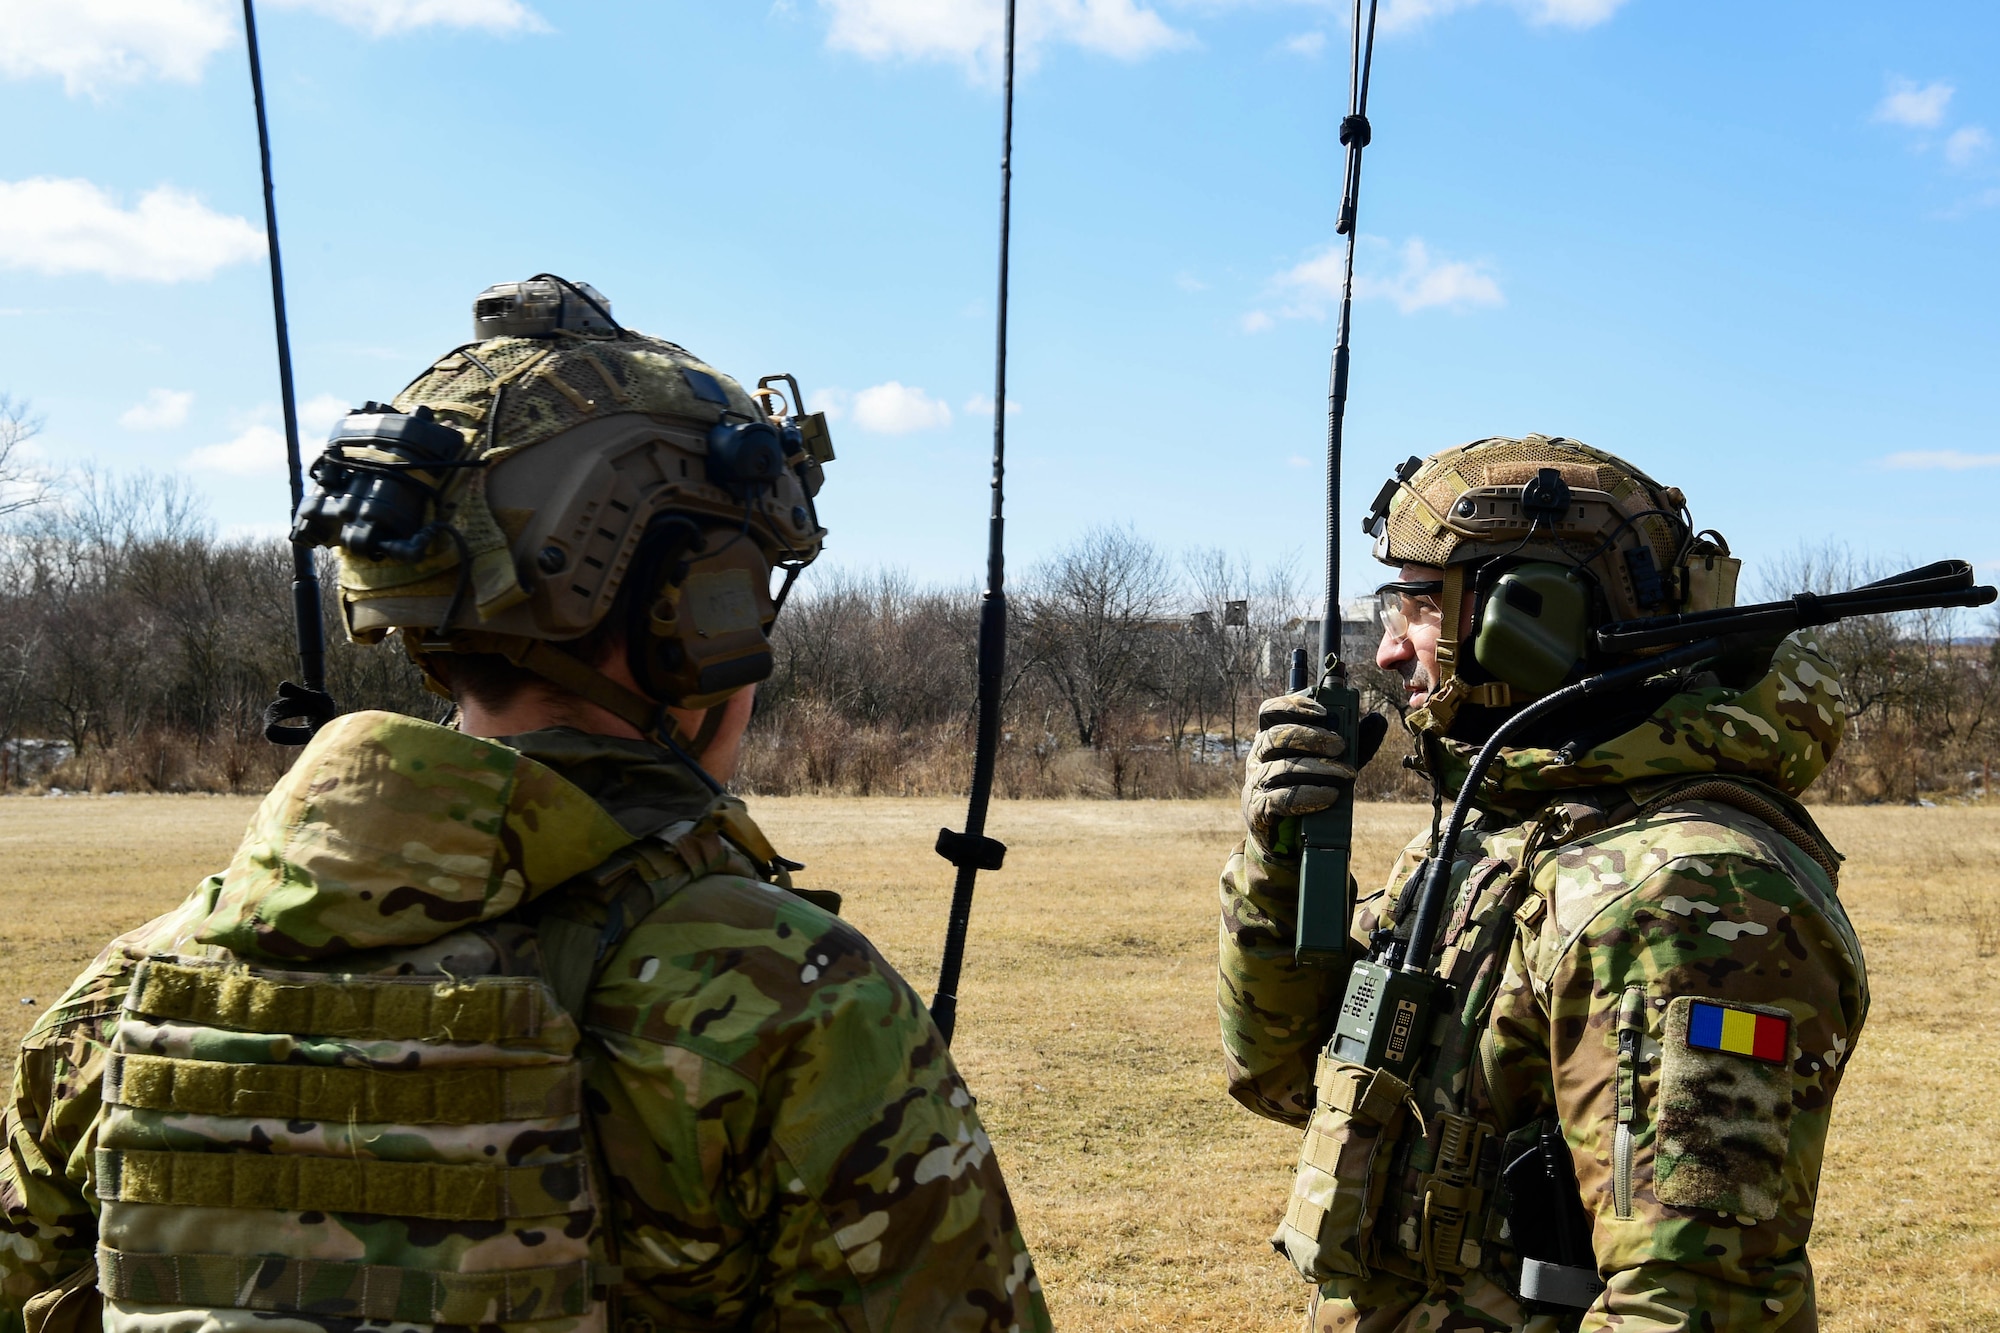 U.S. Air Force 1st Lt. Alexander Mount, 57th Rescue Squadron combat rescue officer, left, teaches how to call in a helicopter for extraction in Romania, March, 9, 2022. The 57th RQS and the 56th RQS alongside the Royal Marines Commando Mobile Air Operations team with Commando Helicopter Force provided training on how to safely operate around a helicopter to the 51st Commando Battalion Romanian Special Forces. (U.S. Air Force Photo by Senior Airman Noah Sudolcan)